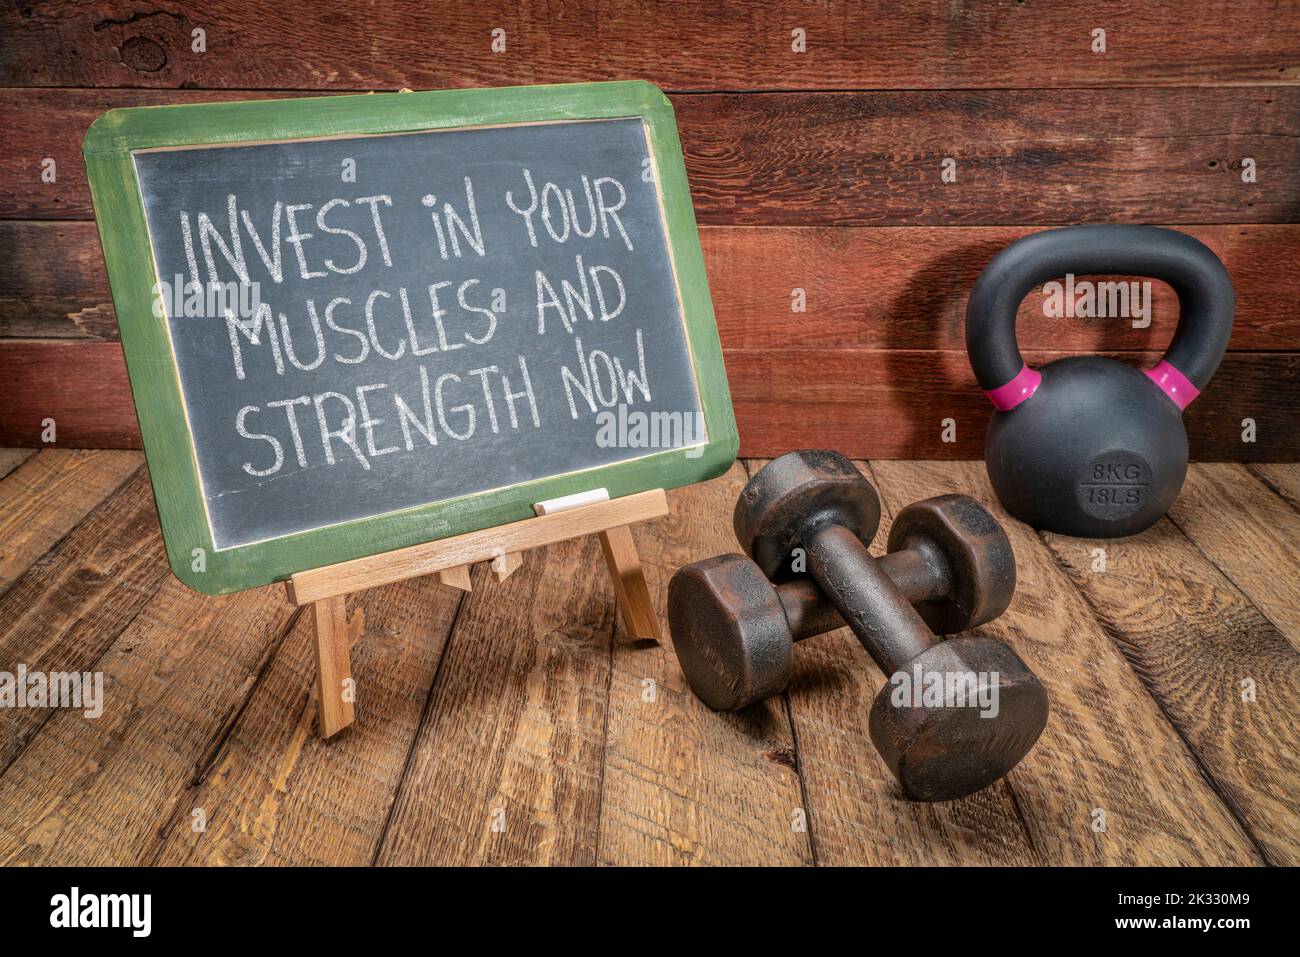 invest in your muscles and strength now - motivational text on a blackboard with dumbbells and kettlebell, health and fitness concept Stock Photo